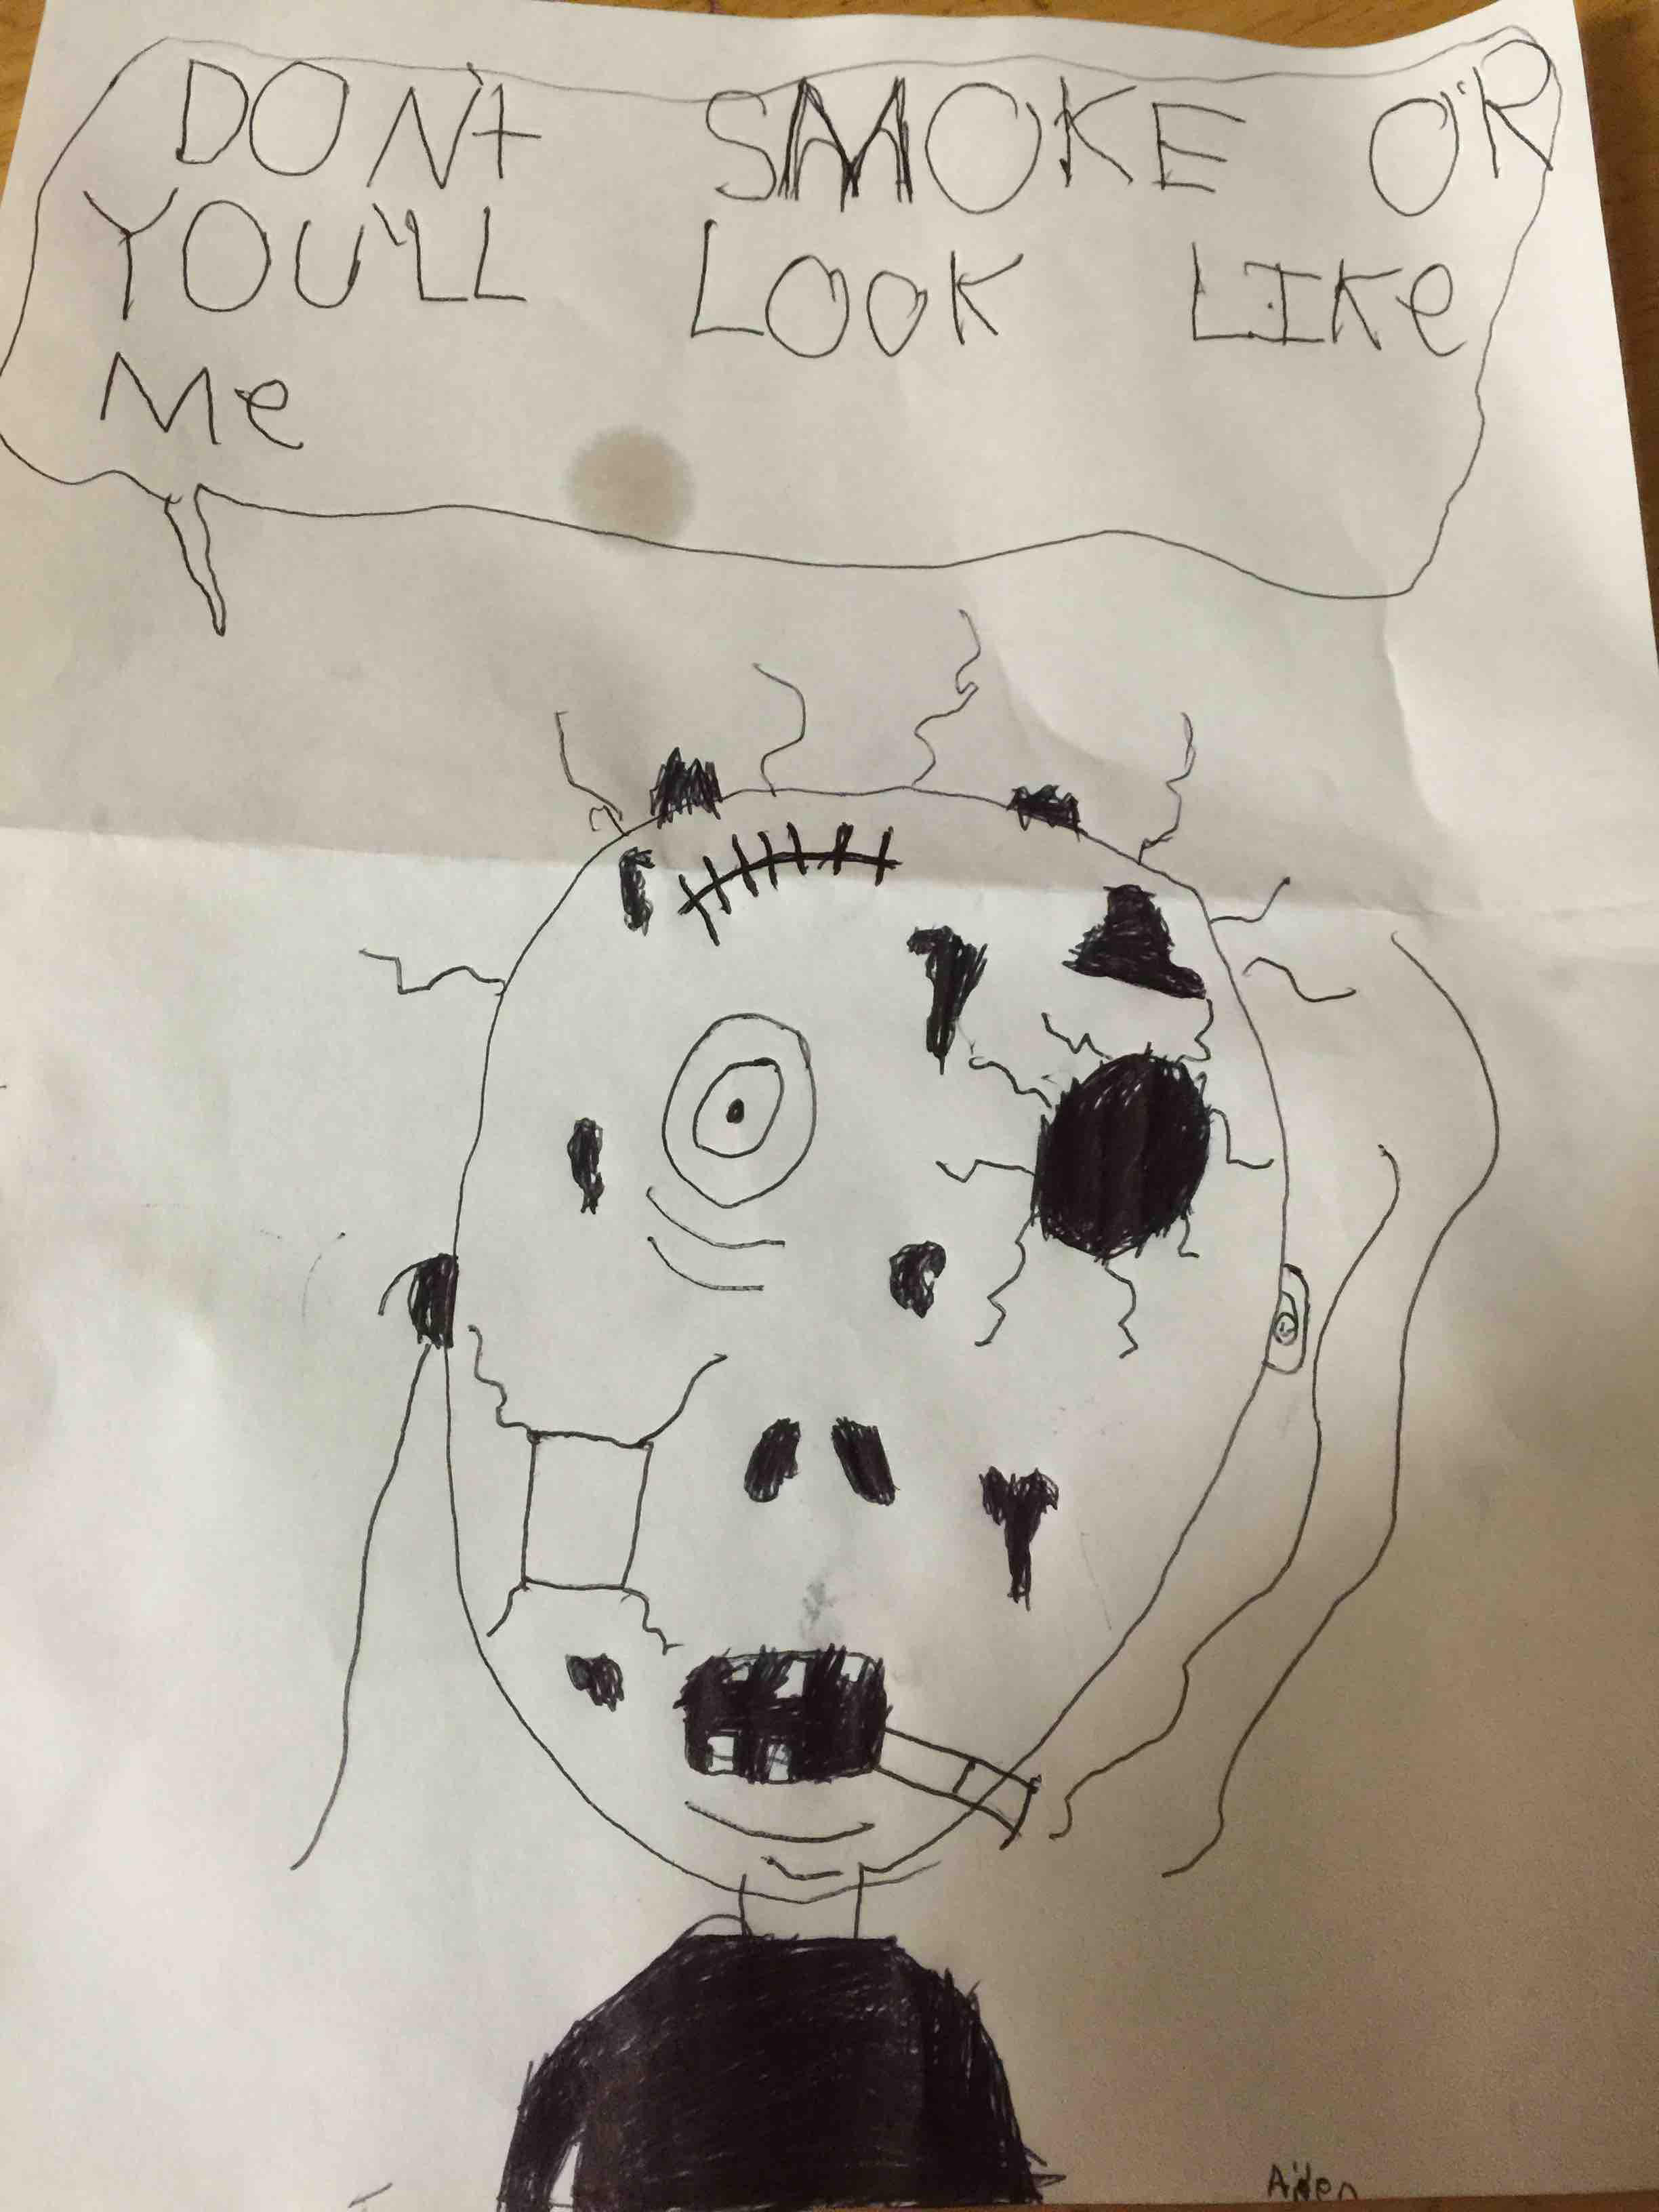 21 Funny Kids Drawings That Won't Be Going On The Fridge